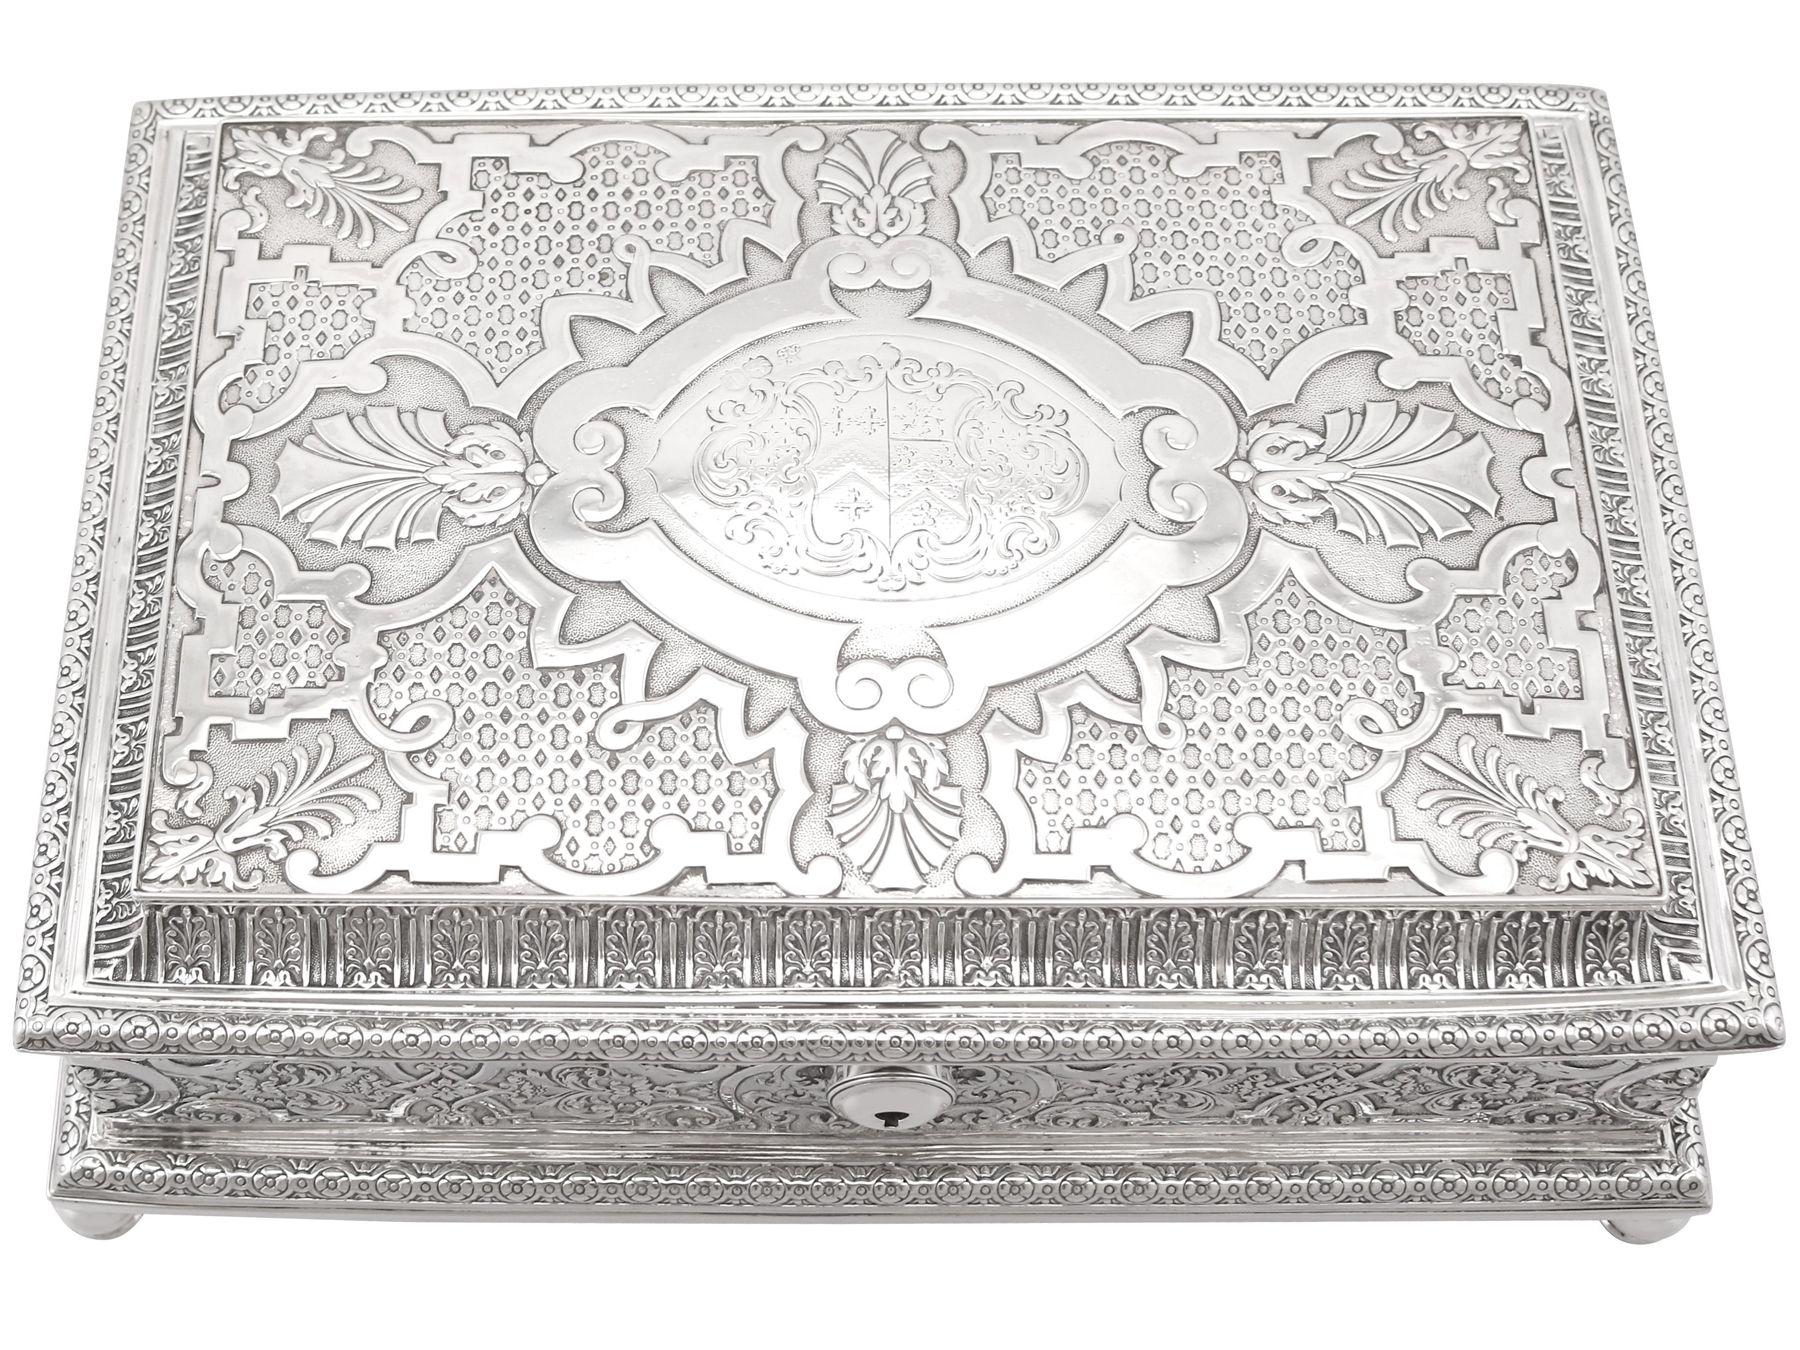 A magnificent, fine and impressive, large antique Victorian English sterling silver locking jewellery casket; an addition to the ornamental silverware collection.

This magnificent and large antique sterling silver jewellery box/casket has a